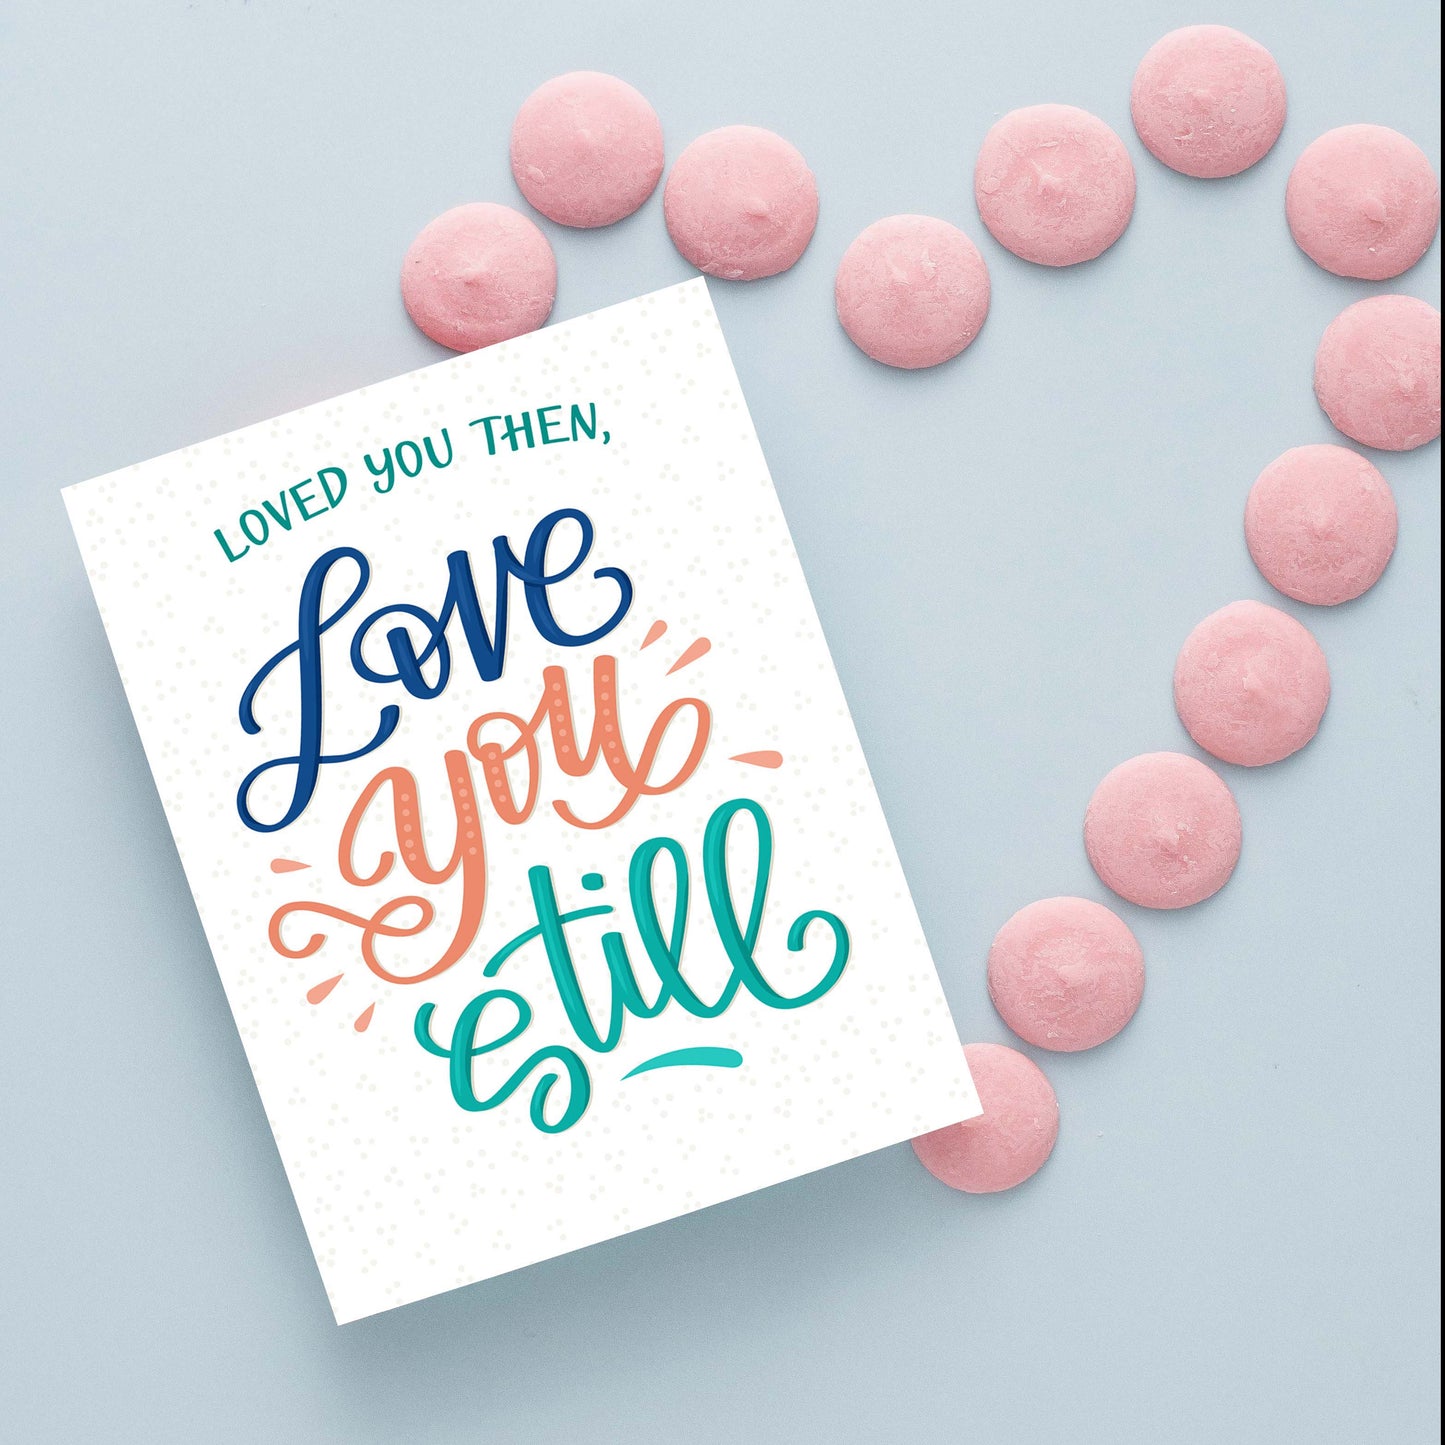 Loved you then, Love you still Anniversary Card